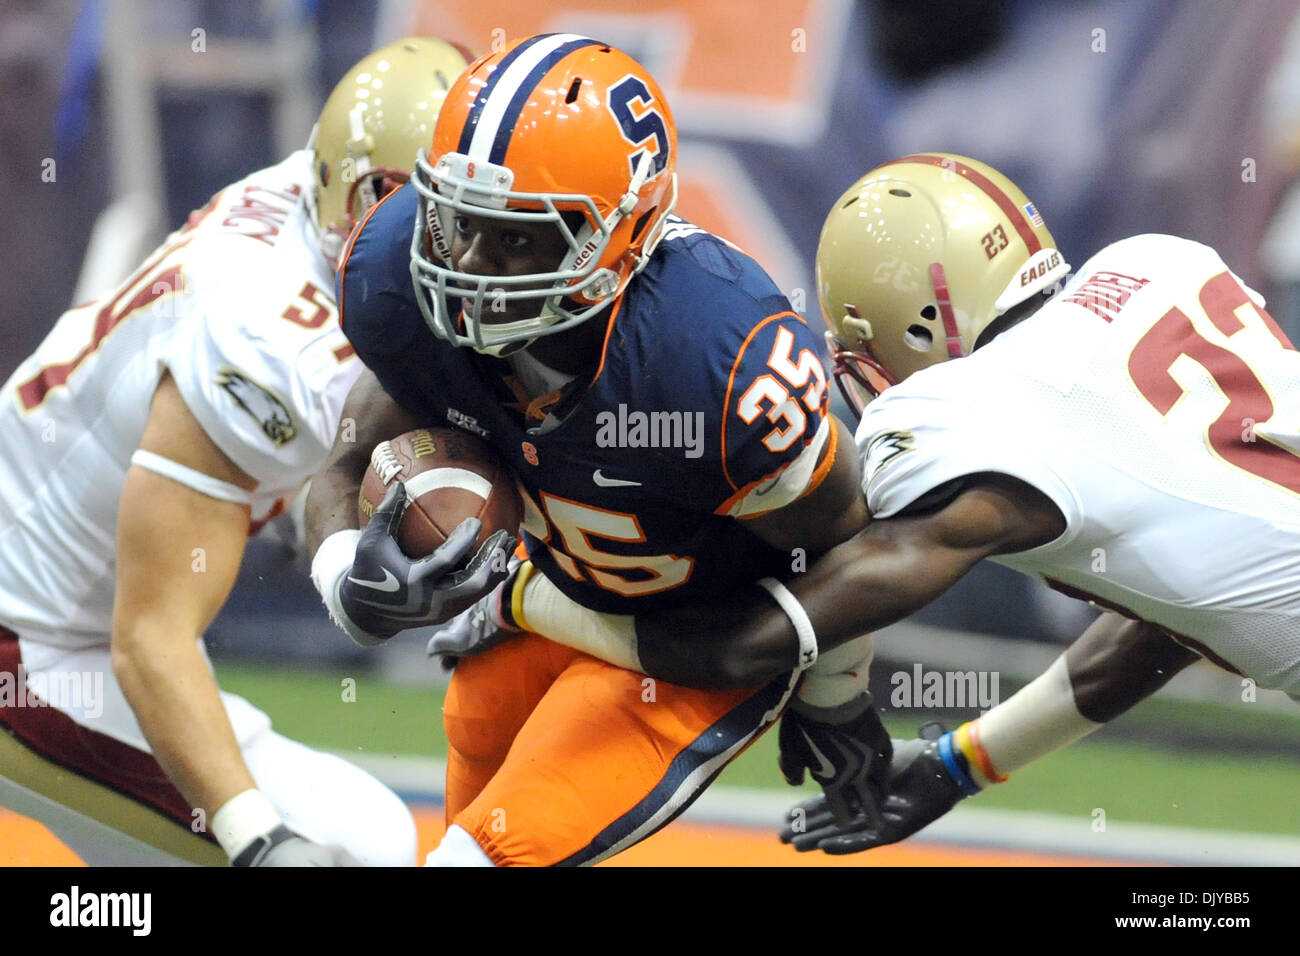 Nov. 27, 2010 - Syracuse, New York, United States of America - Syracuse Orange safety Michael Holmes (35) breaks through the arm tackle by Boston College Eagles cornerback Jim Noel (23) in the fourth quarter while fielding a punt. Boston College defeated Syracuse to qualify for a BCS Bowl game with a final score of 16-7 at the Carrier Dome in Syracuse, New York. (Credit Image: © Mi Stock Photo